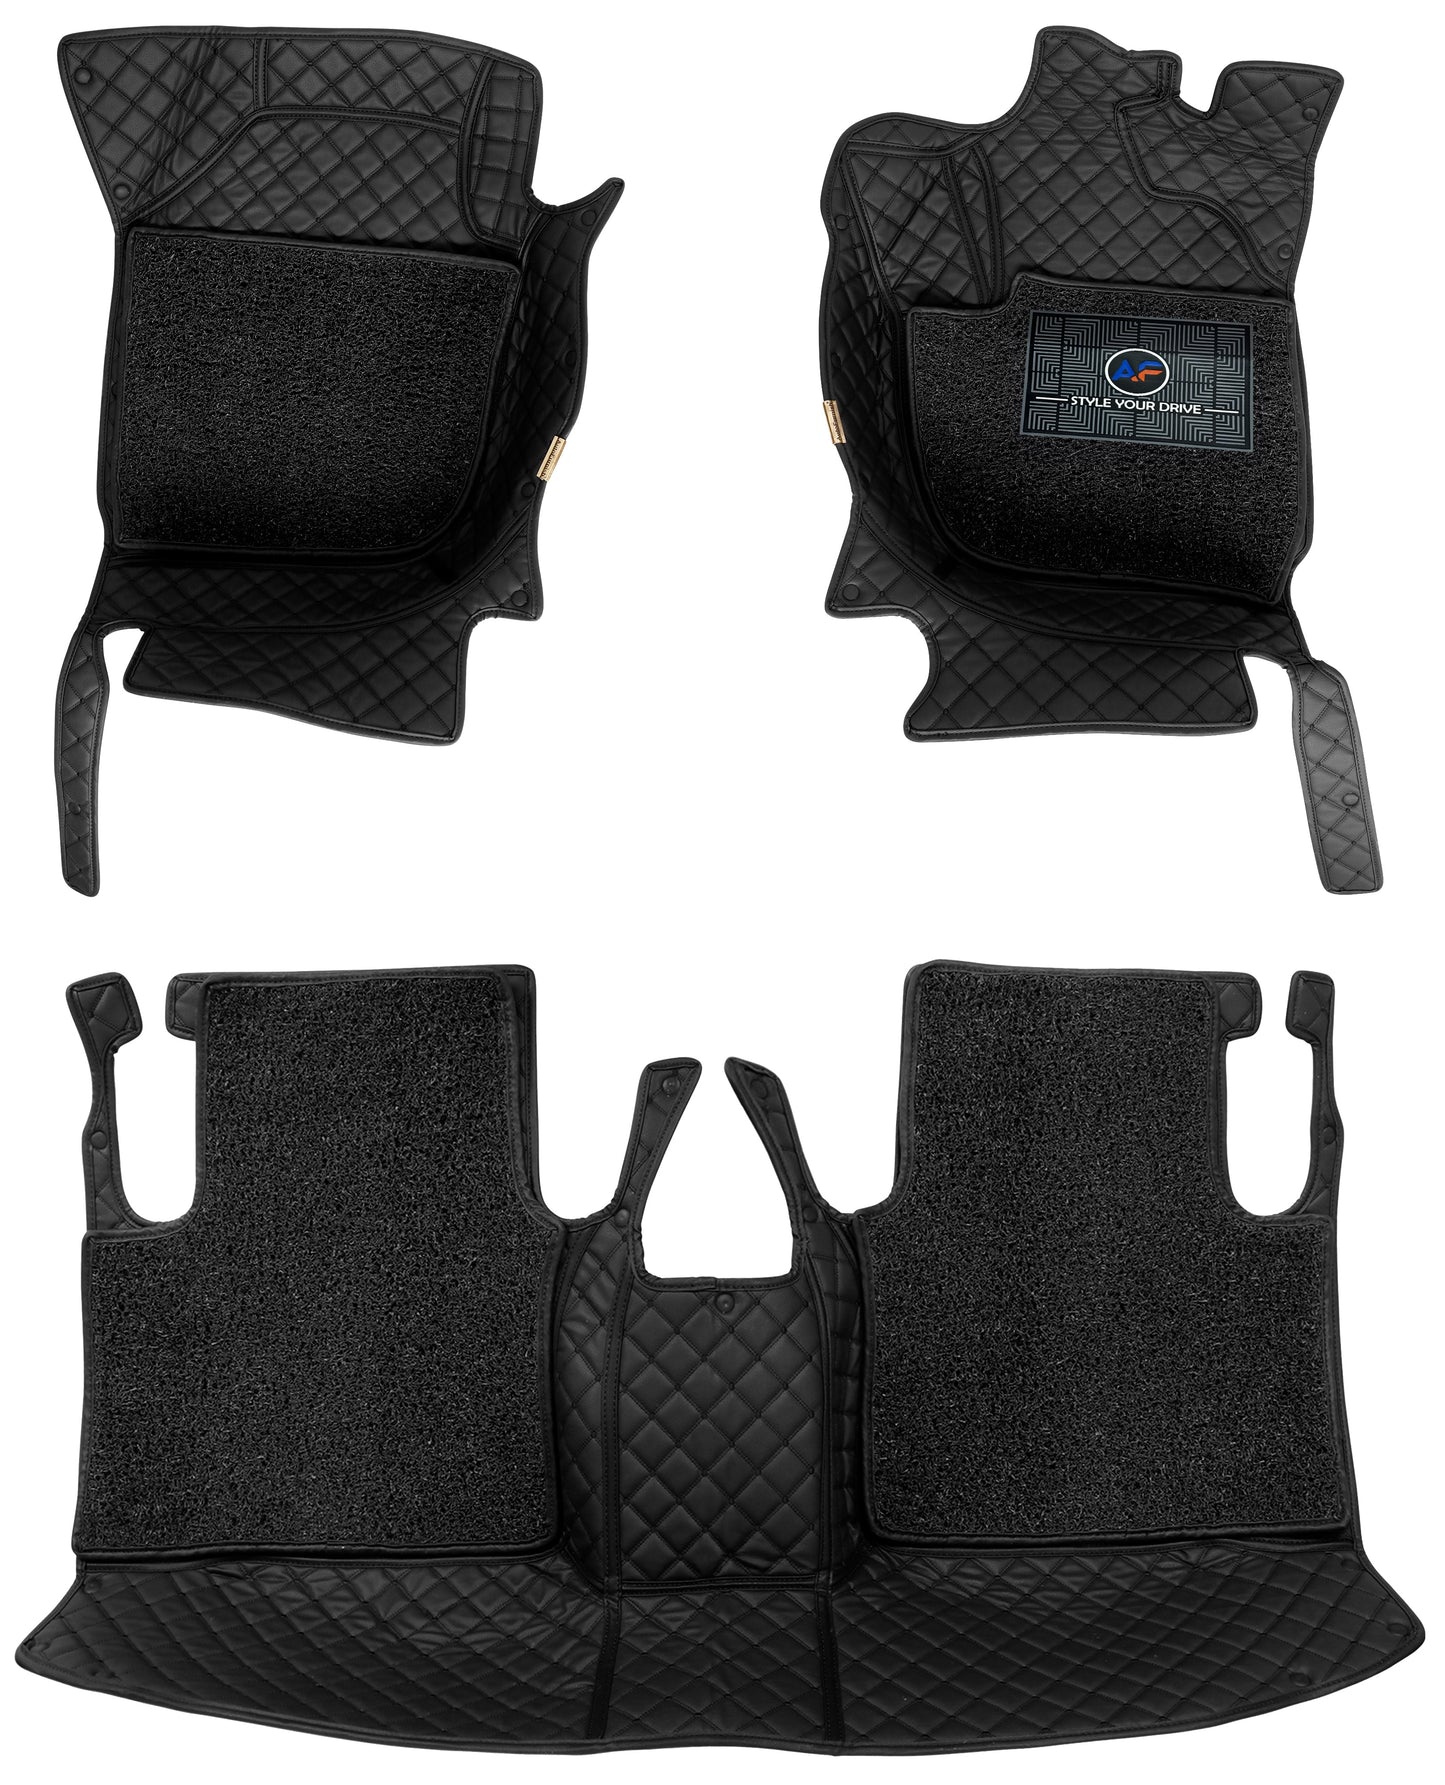 Land Rover Discovery Sport HSE (5 Seater) 2020 7D Luxury Car Mat, All Weather Proof, Anti-Skid, 100% Waterproof & Odorless with Unique Diamond Fish Design (24mm Luxury PU Leather, 2 Rows)